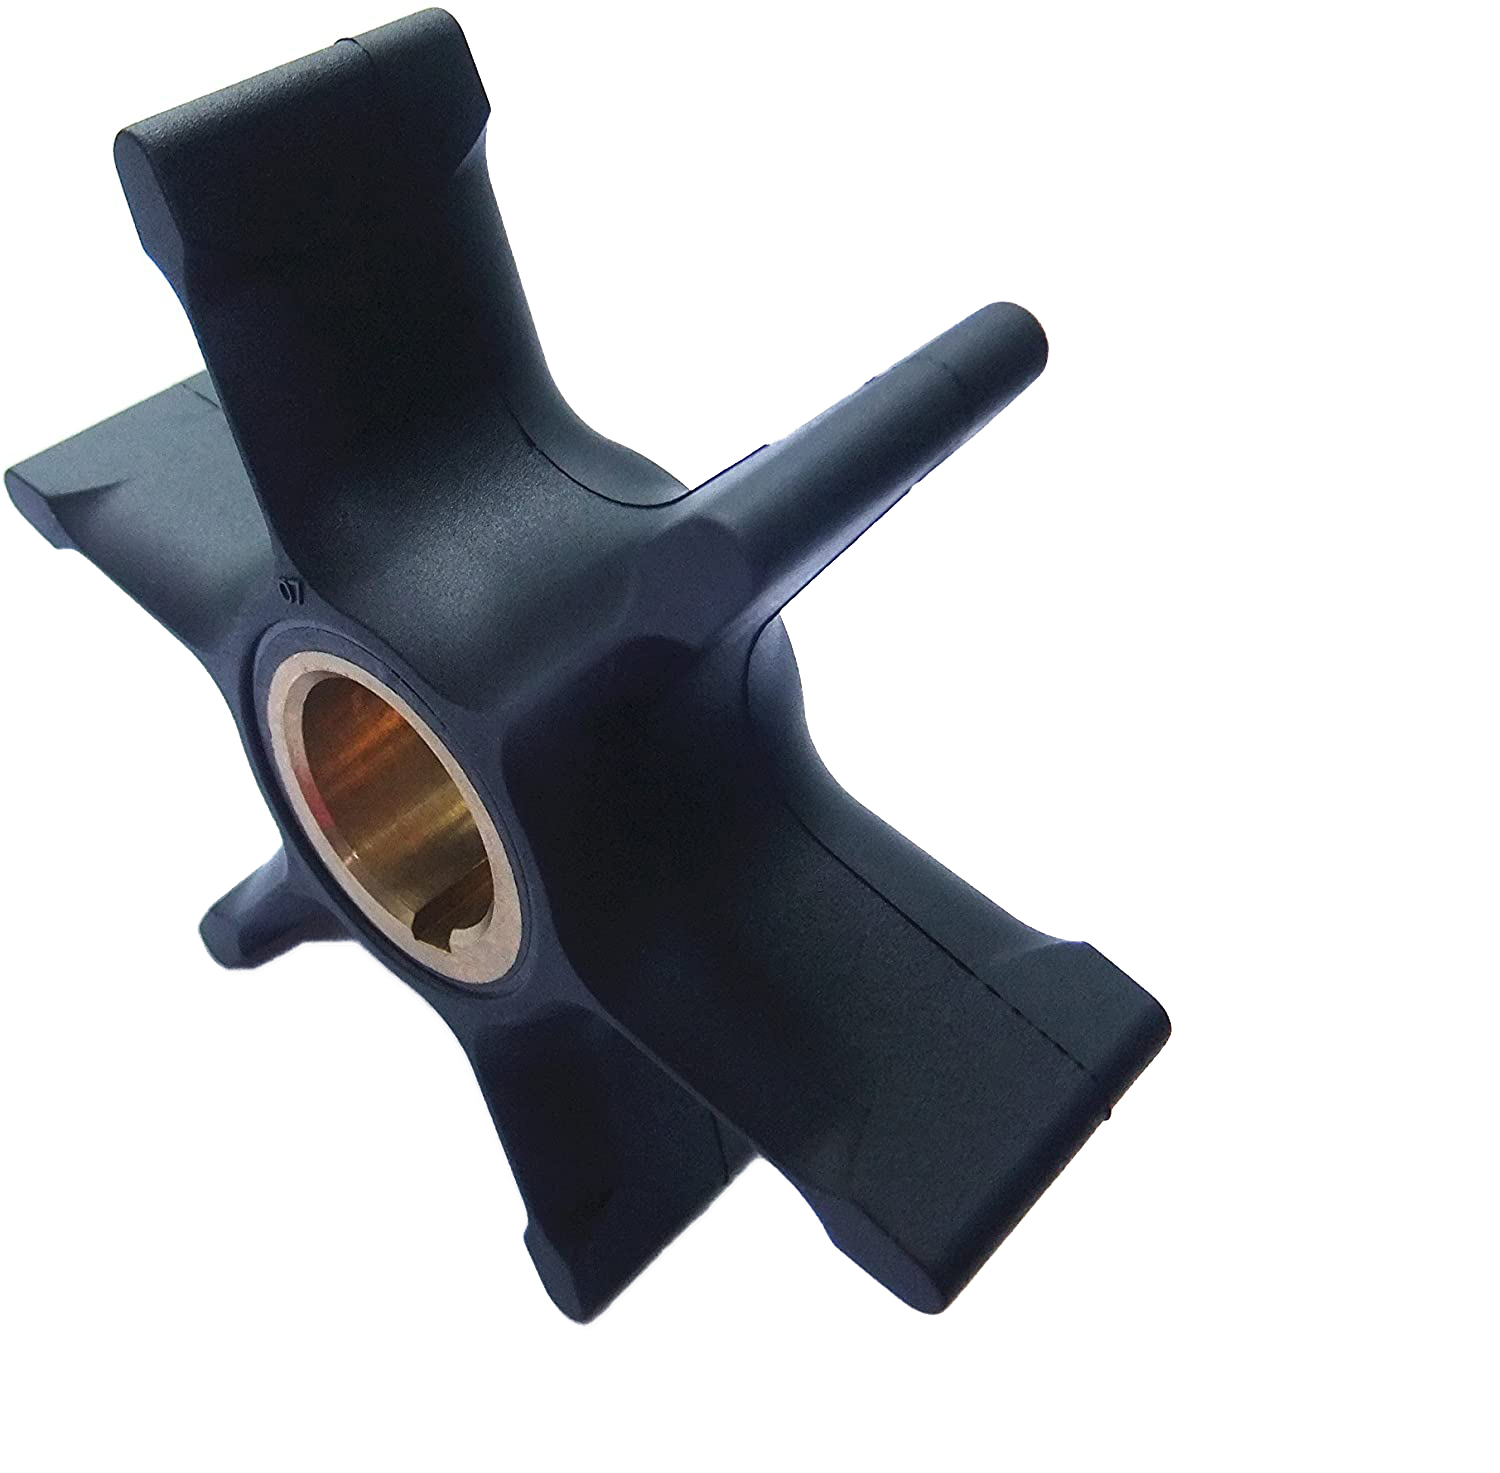 Boat Engine Water Pump Impeller 382547 0382547 0765431 18-3082 for Johnson Evinrude OMC BRP 55HP 60HP 65HP 70HP 75HP Outboard